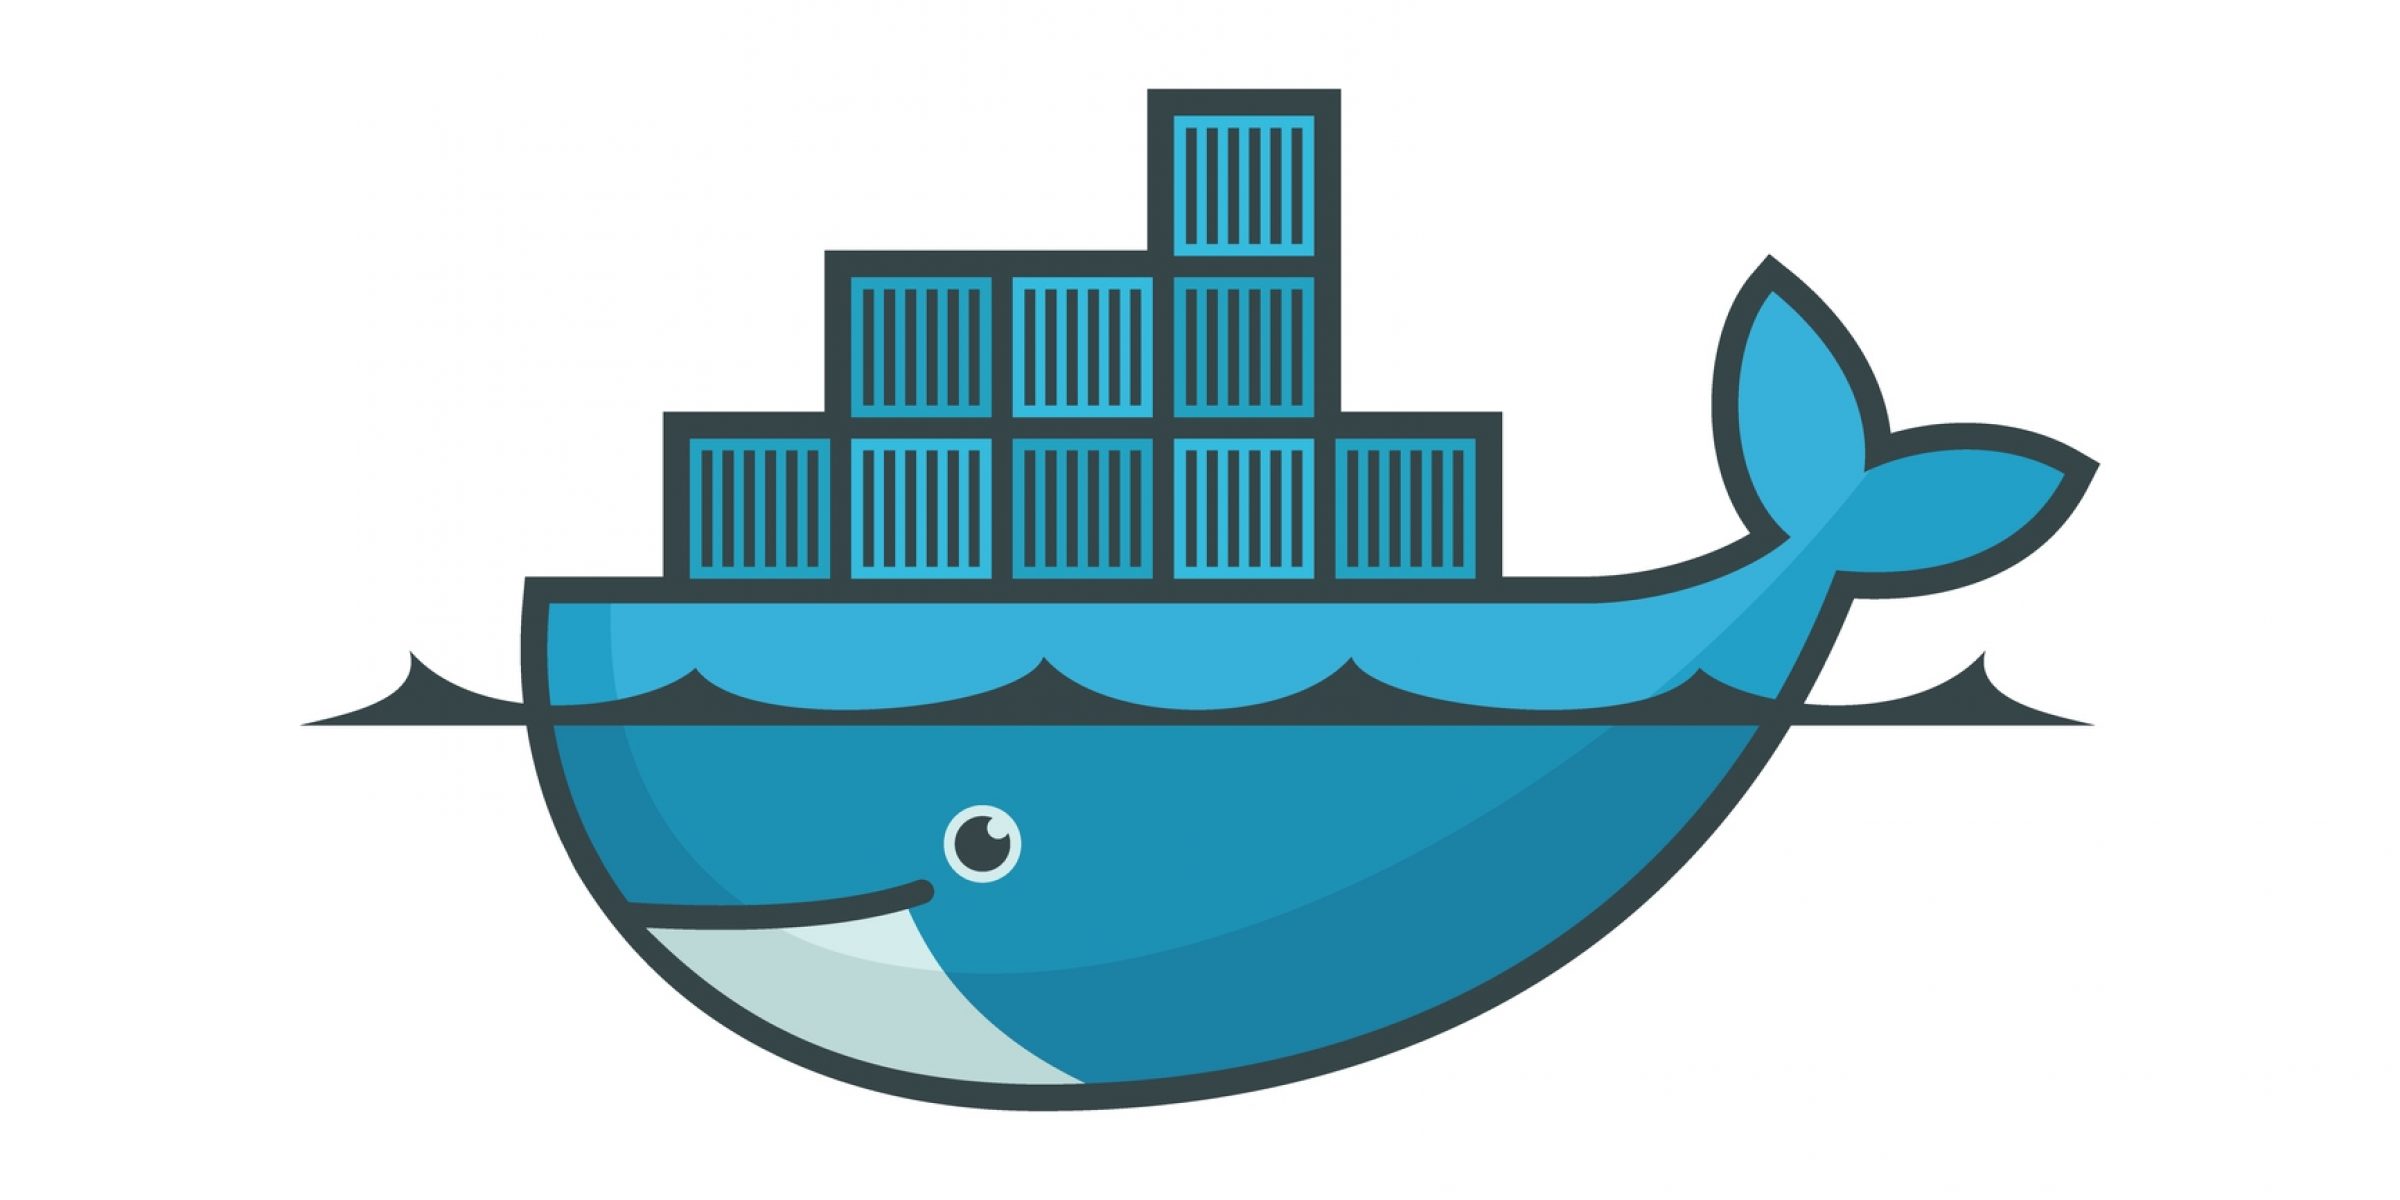 What is docker and why everyone is using it?